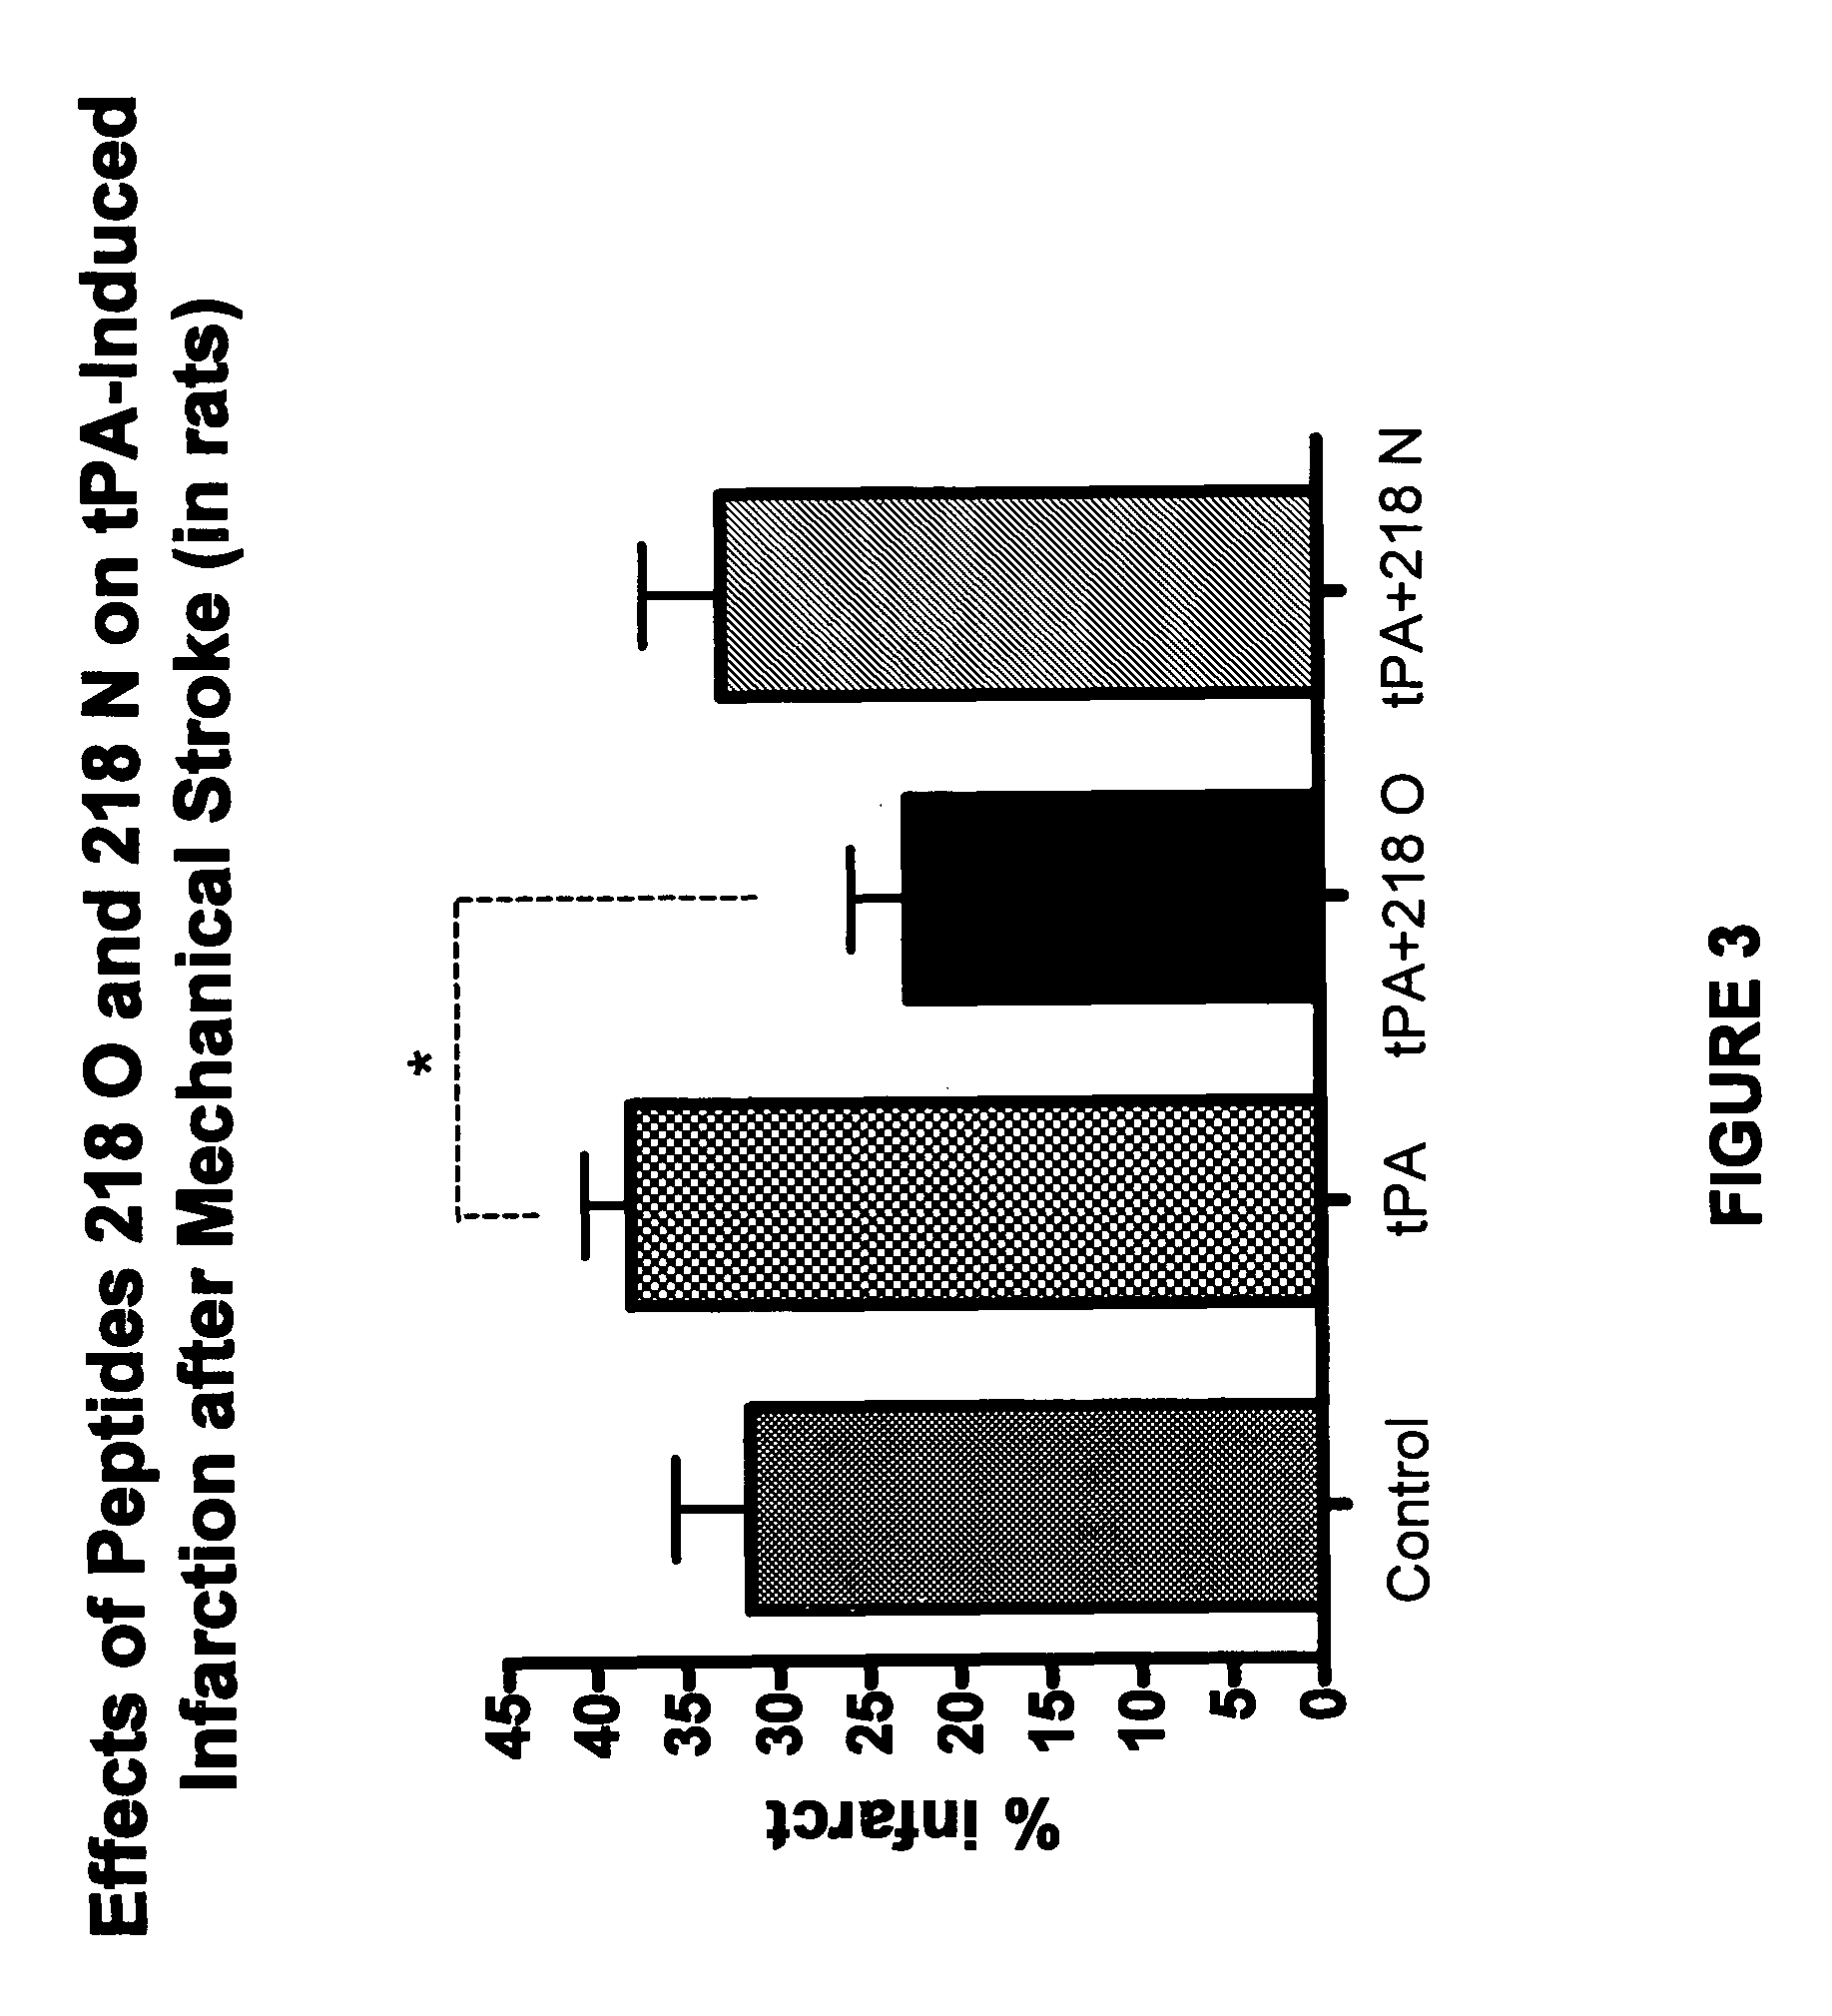 Peptides derived from plasminogen activator inhibitor-1 and uses thereof